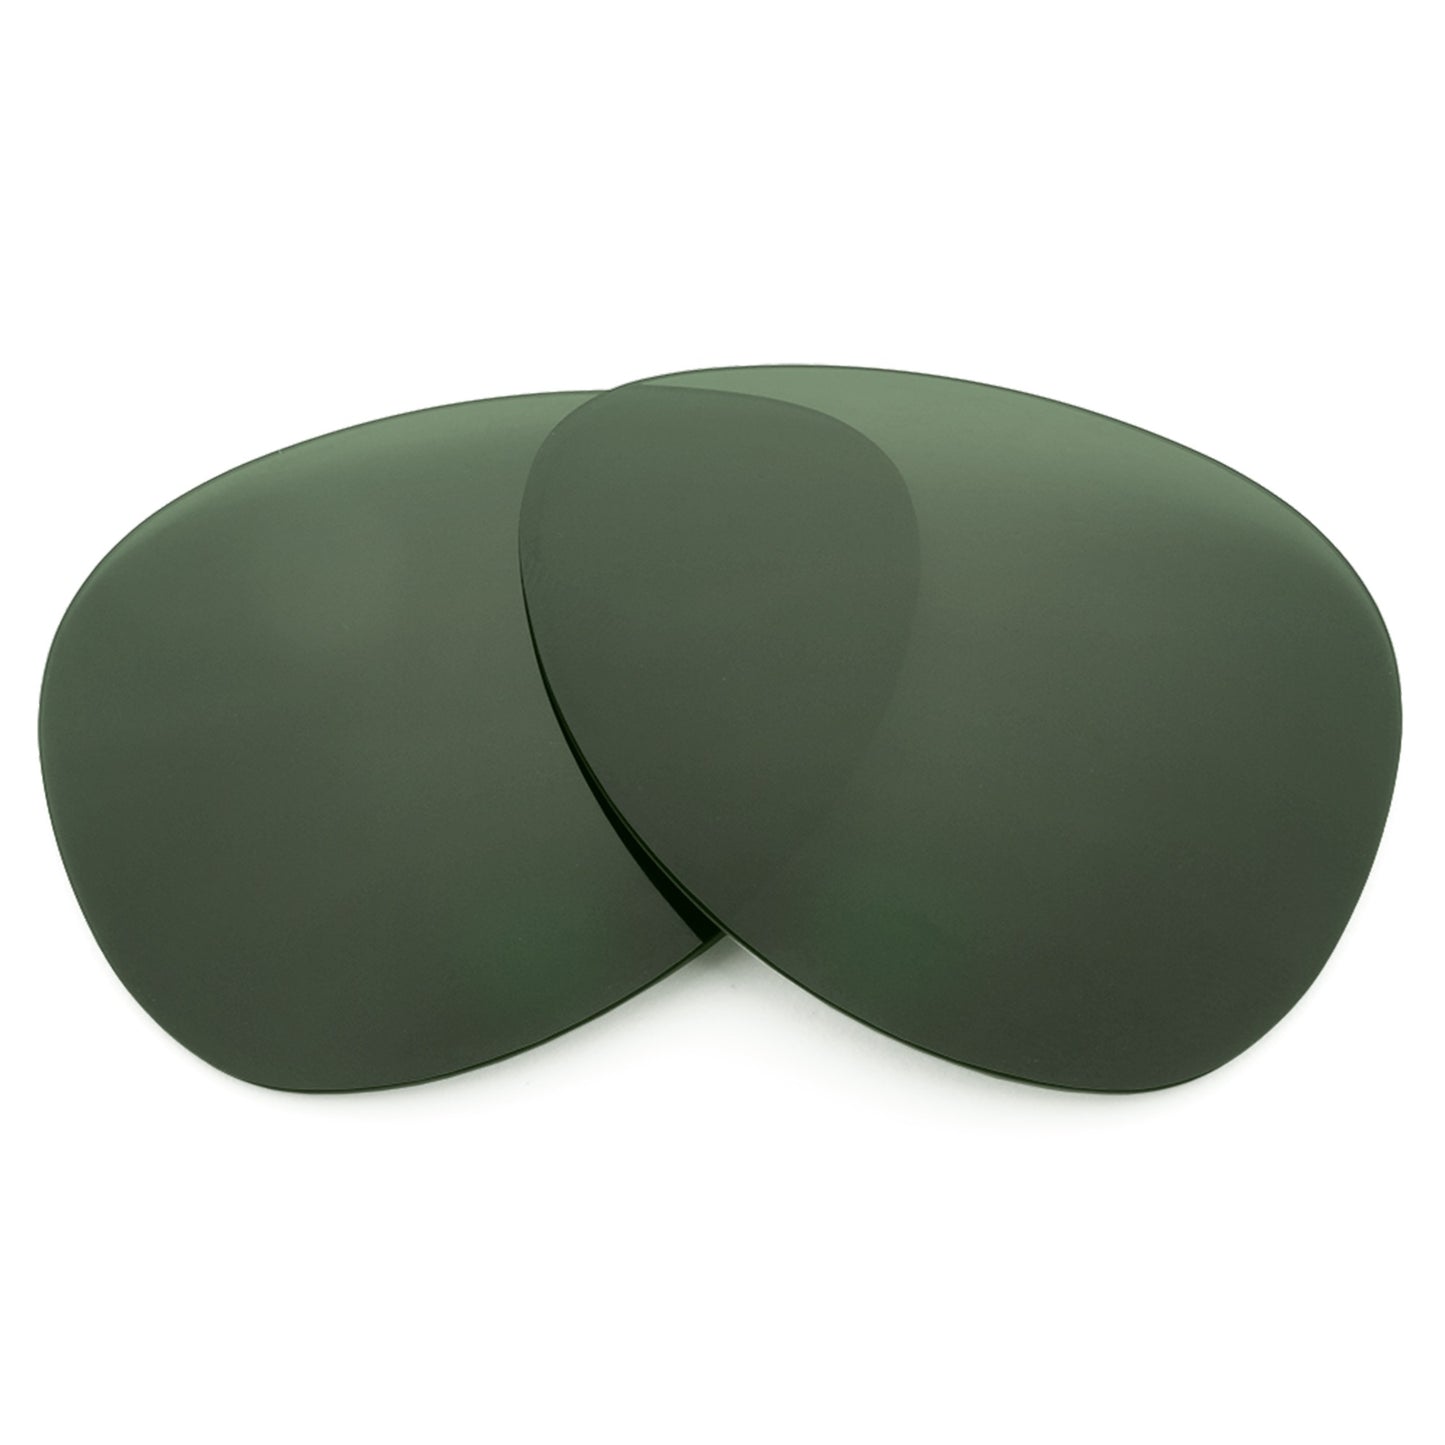 Revant replacement lenses for Ray-Ban Cats 5000 RB4125 59mm Elite Polarized Gray Green